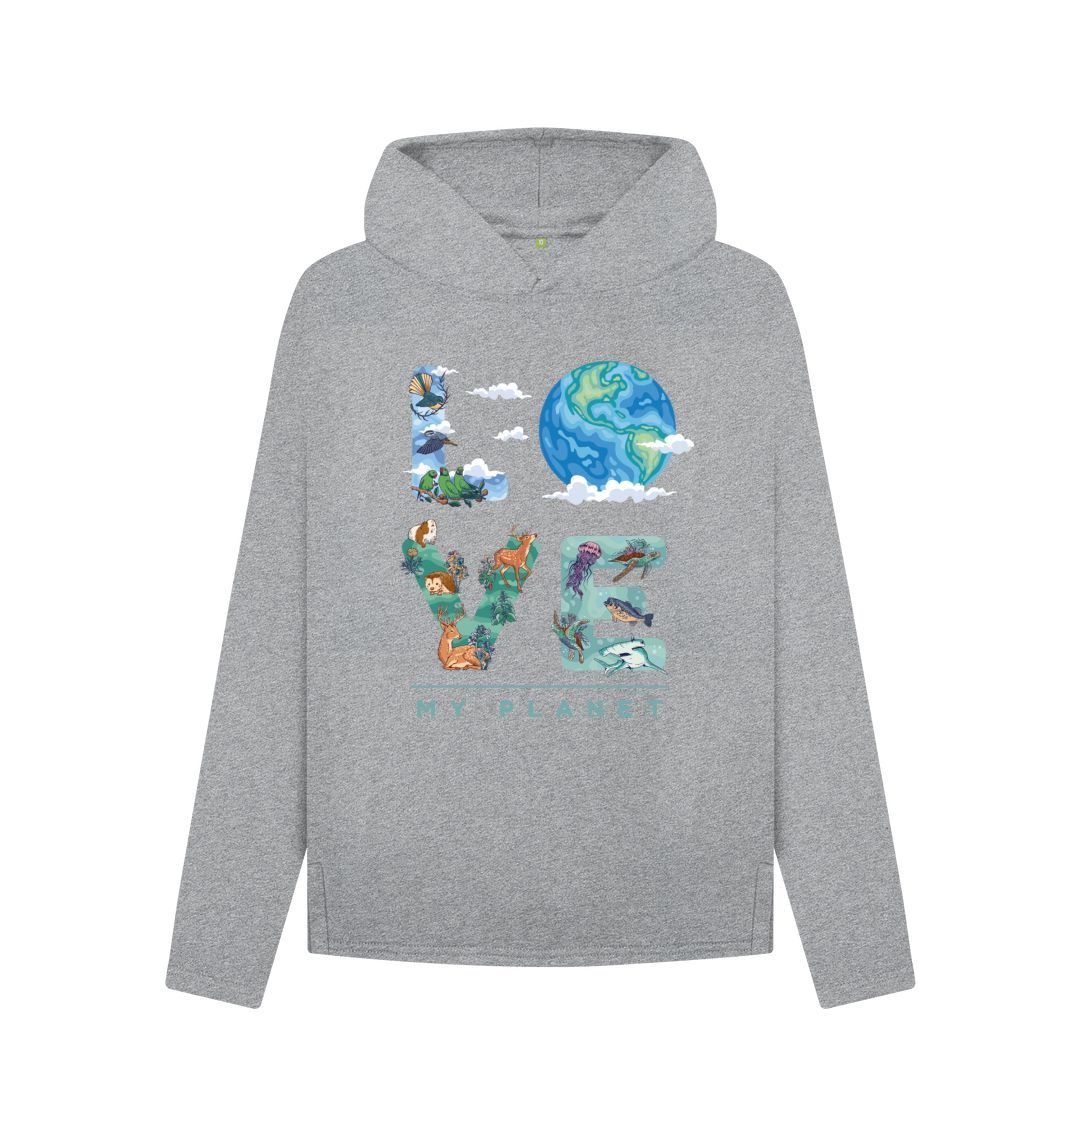 Athletic Grey Love My Planet Women's Relaxed Fit Hoodie